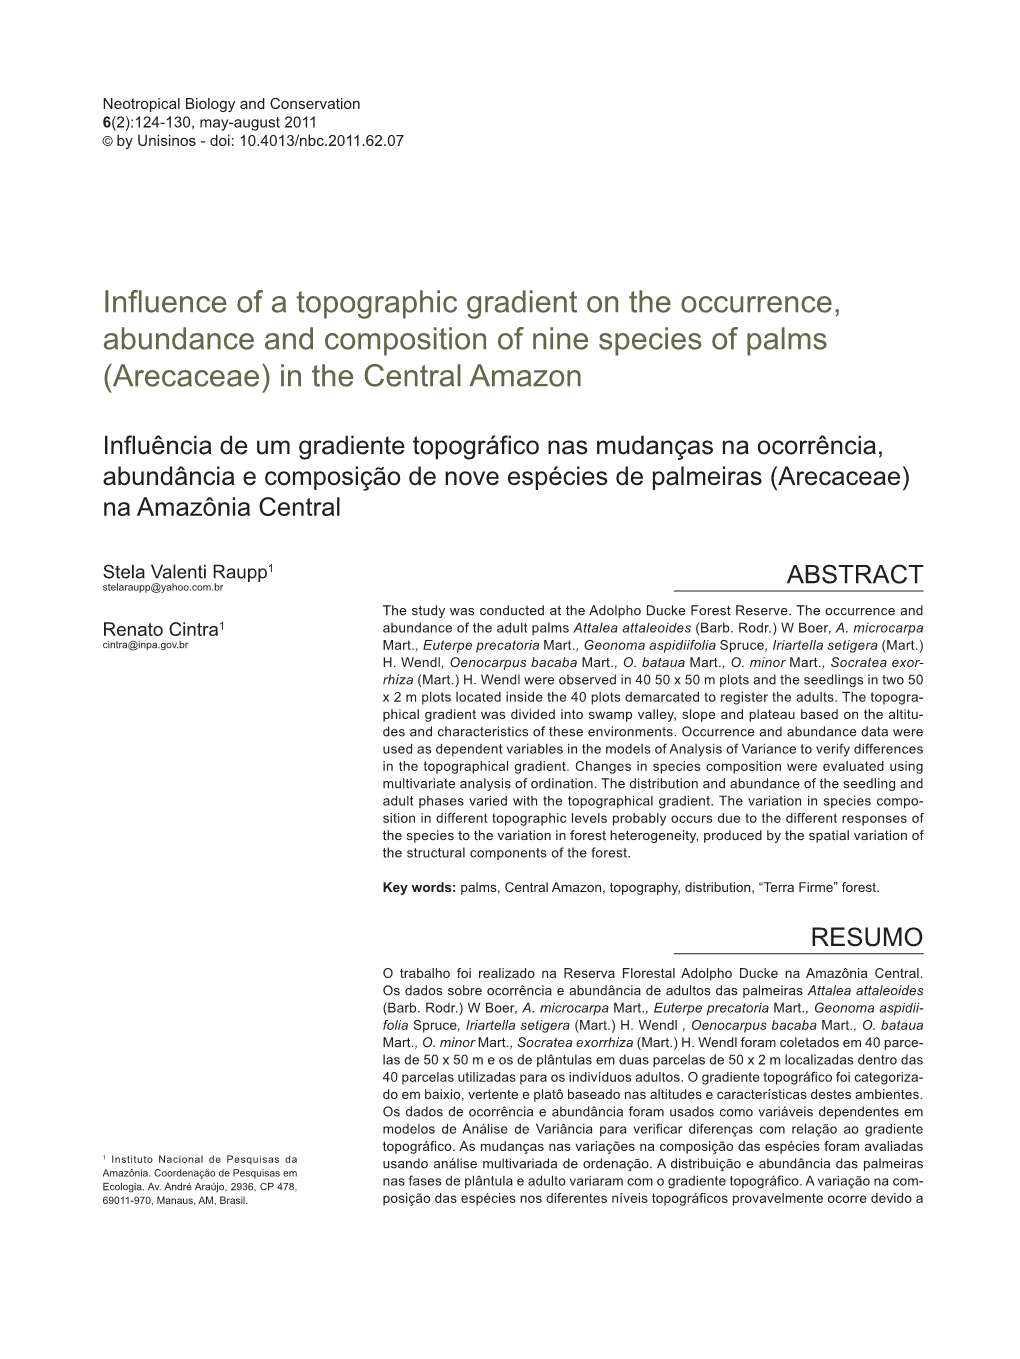 Influence of a Topographic Gradient on the Occurrence, Abundance and Composition of Nine Species of Palms (Arecaceae) in the Central Amazon